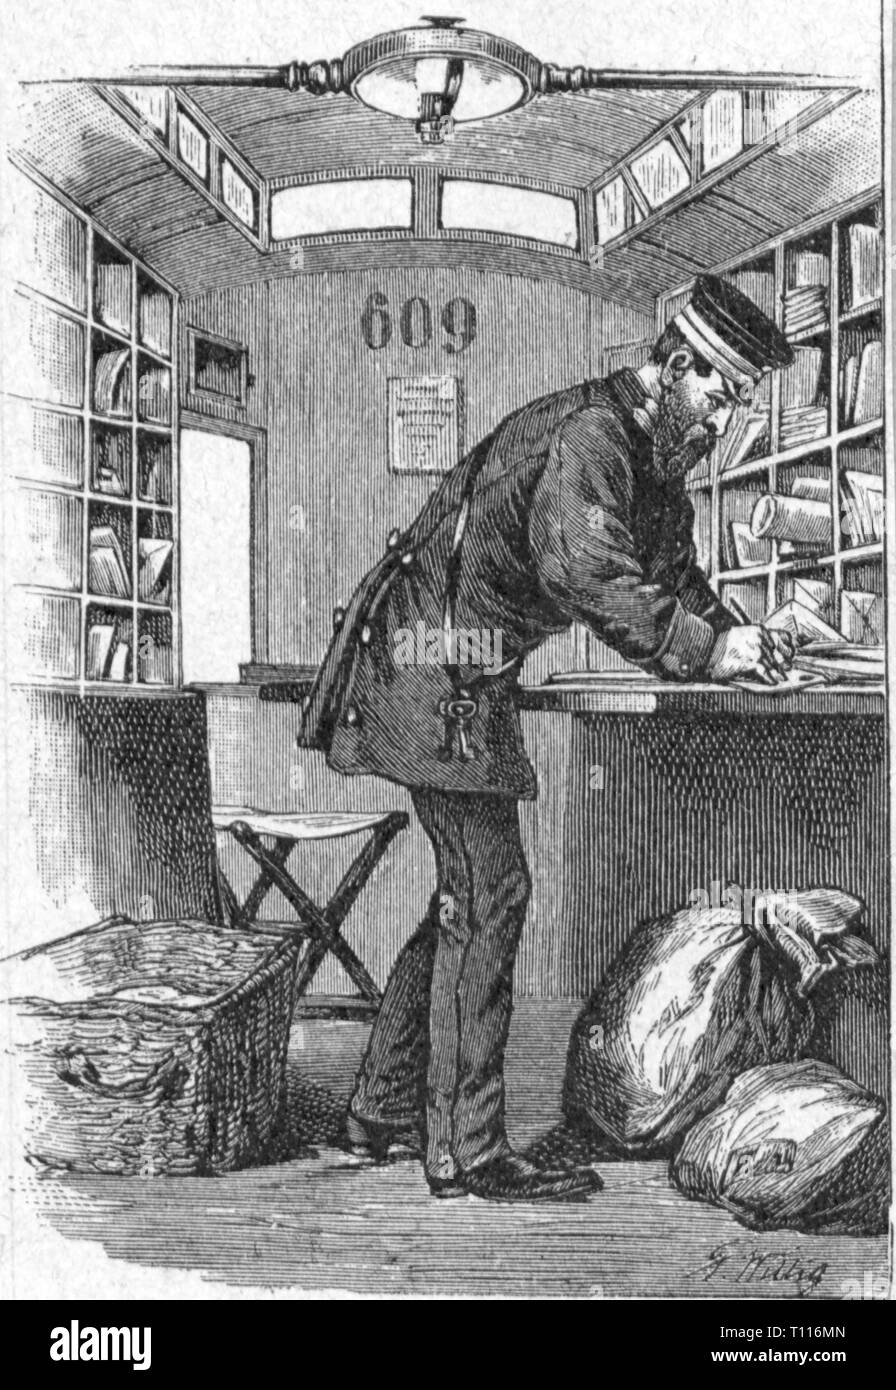 mail, street mail coach of the German Reichspost (Reich Mail) in Berlin, interior view, wood engraving, circa 1890, Additional-Rights-Clearance-Info-Not-Available Stock Photo